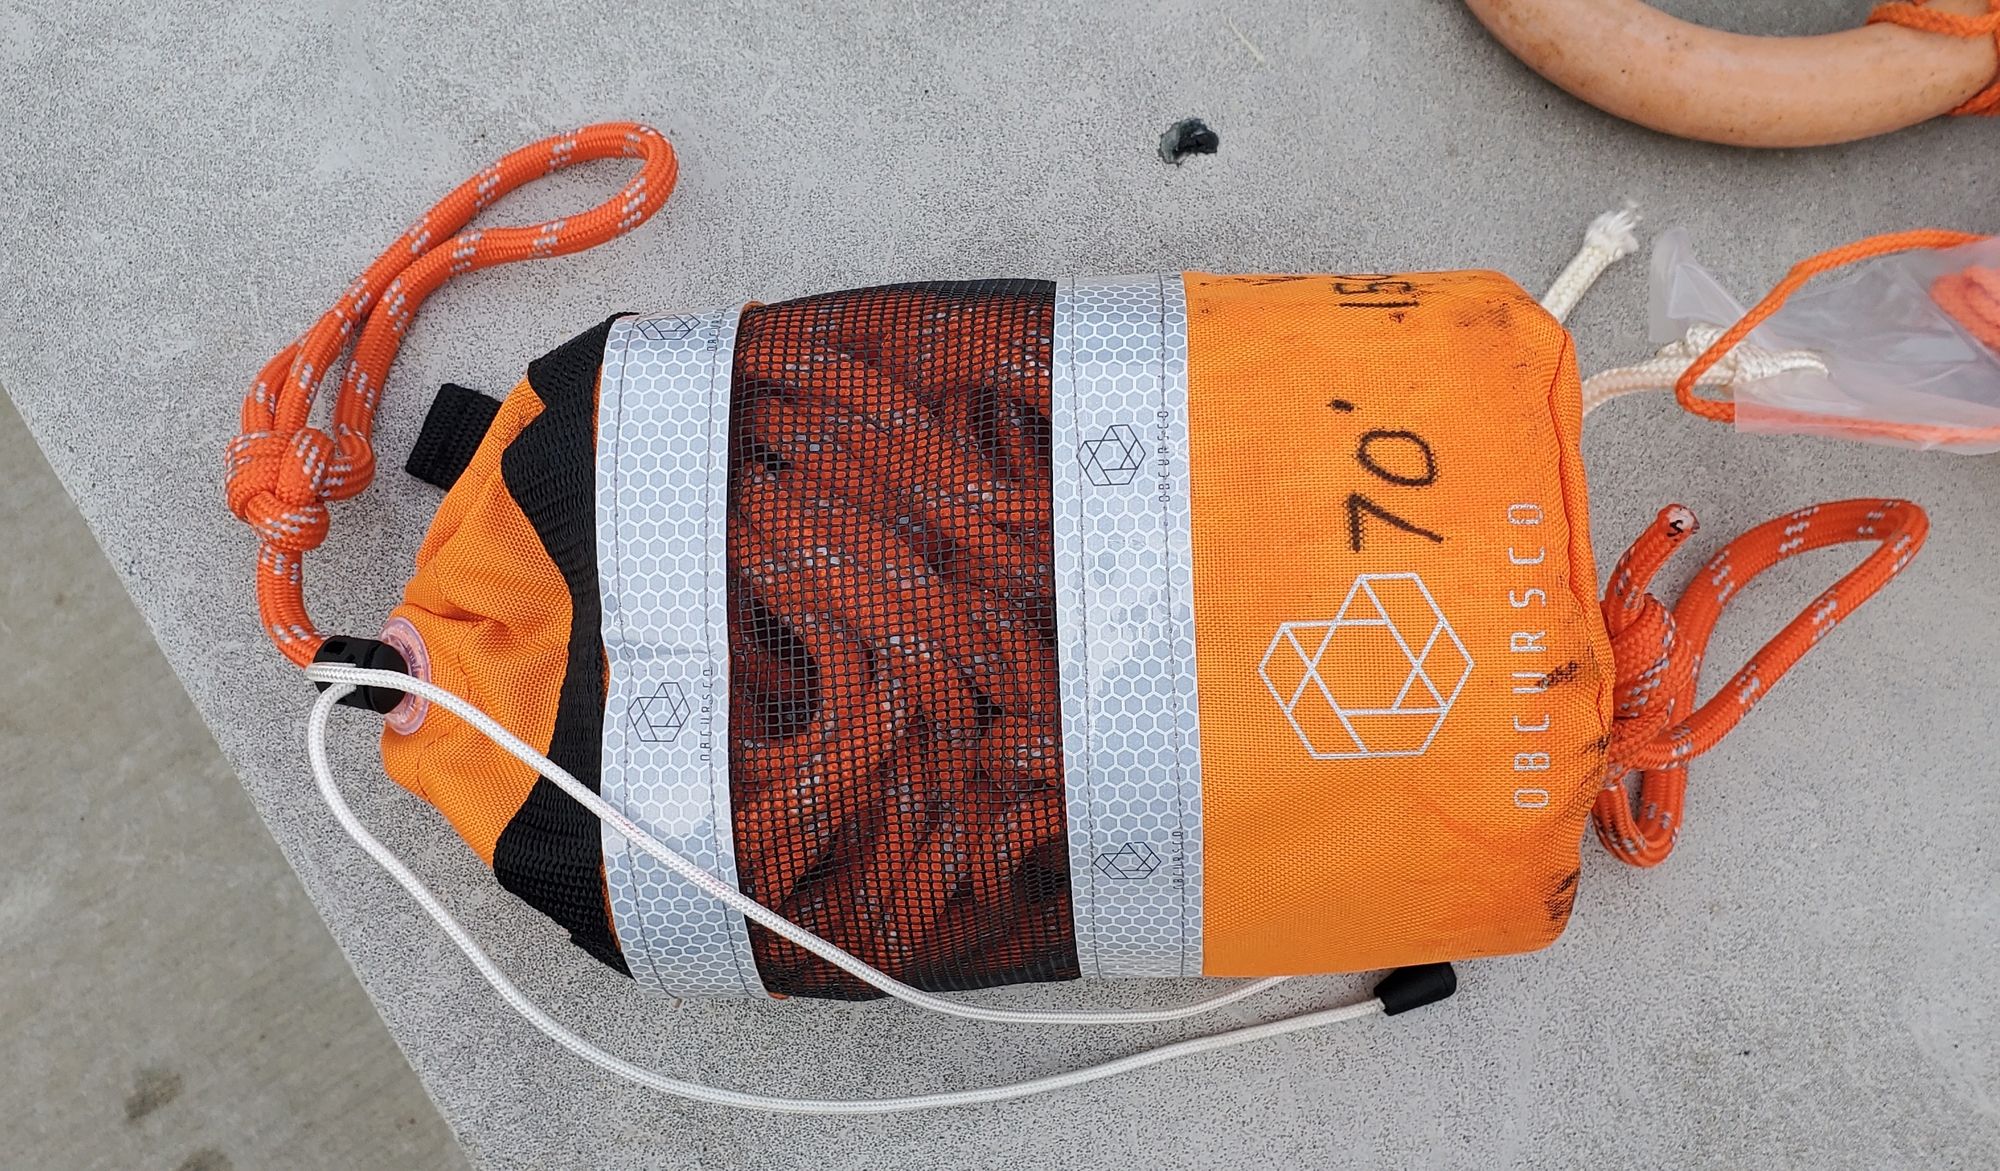 An orange mesh and fabric bag containing 70' of orange safety rope